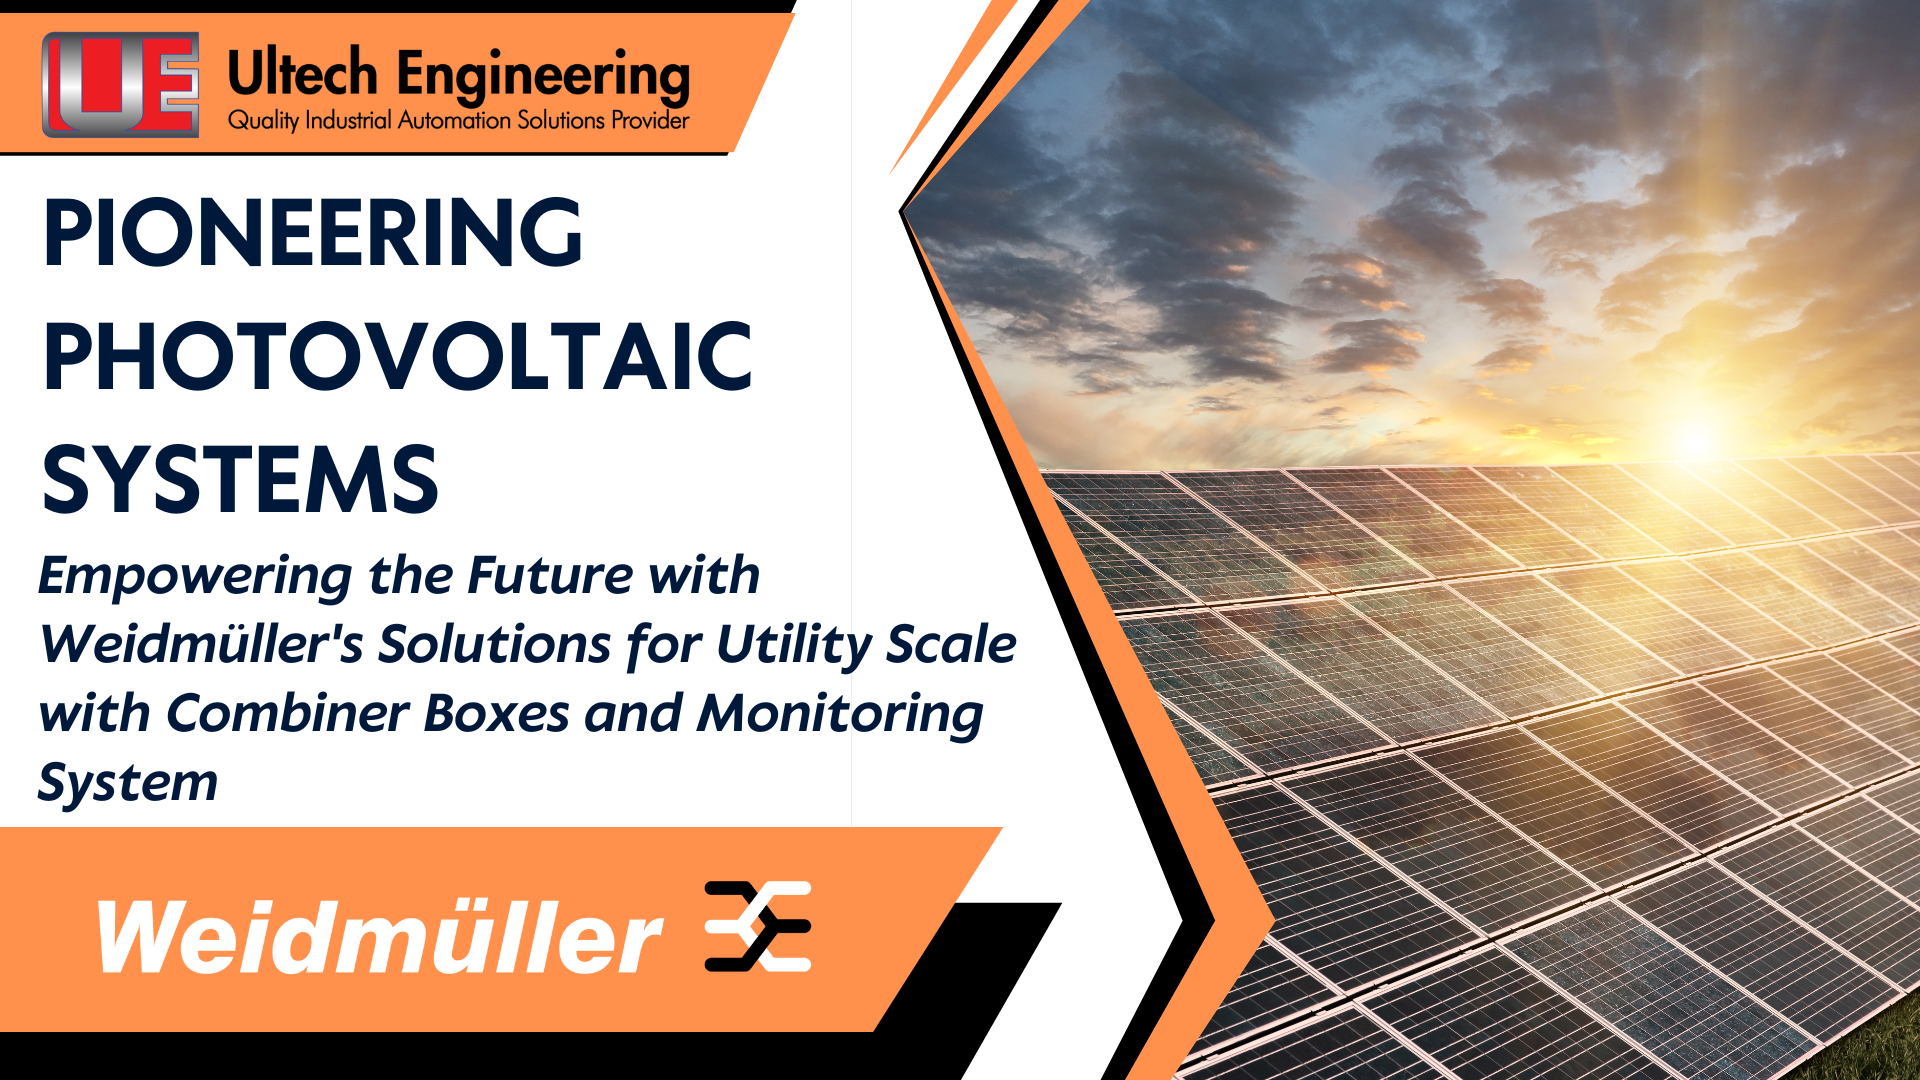 Pioneering Photovoltaic Systems: Weidmüller's Solutions for Utility Scale with Combiner Boxes and Monitoring System